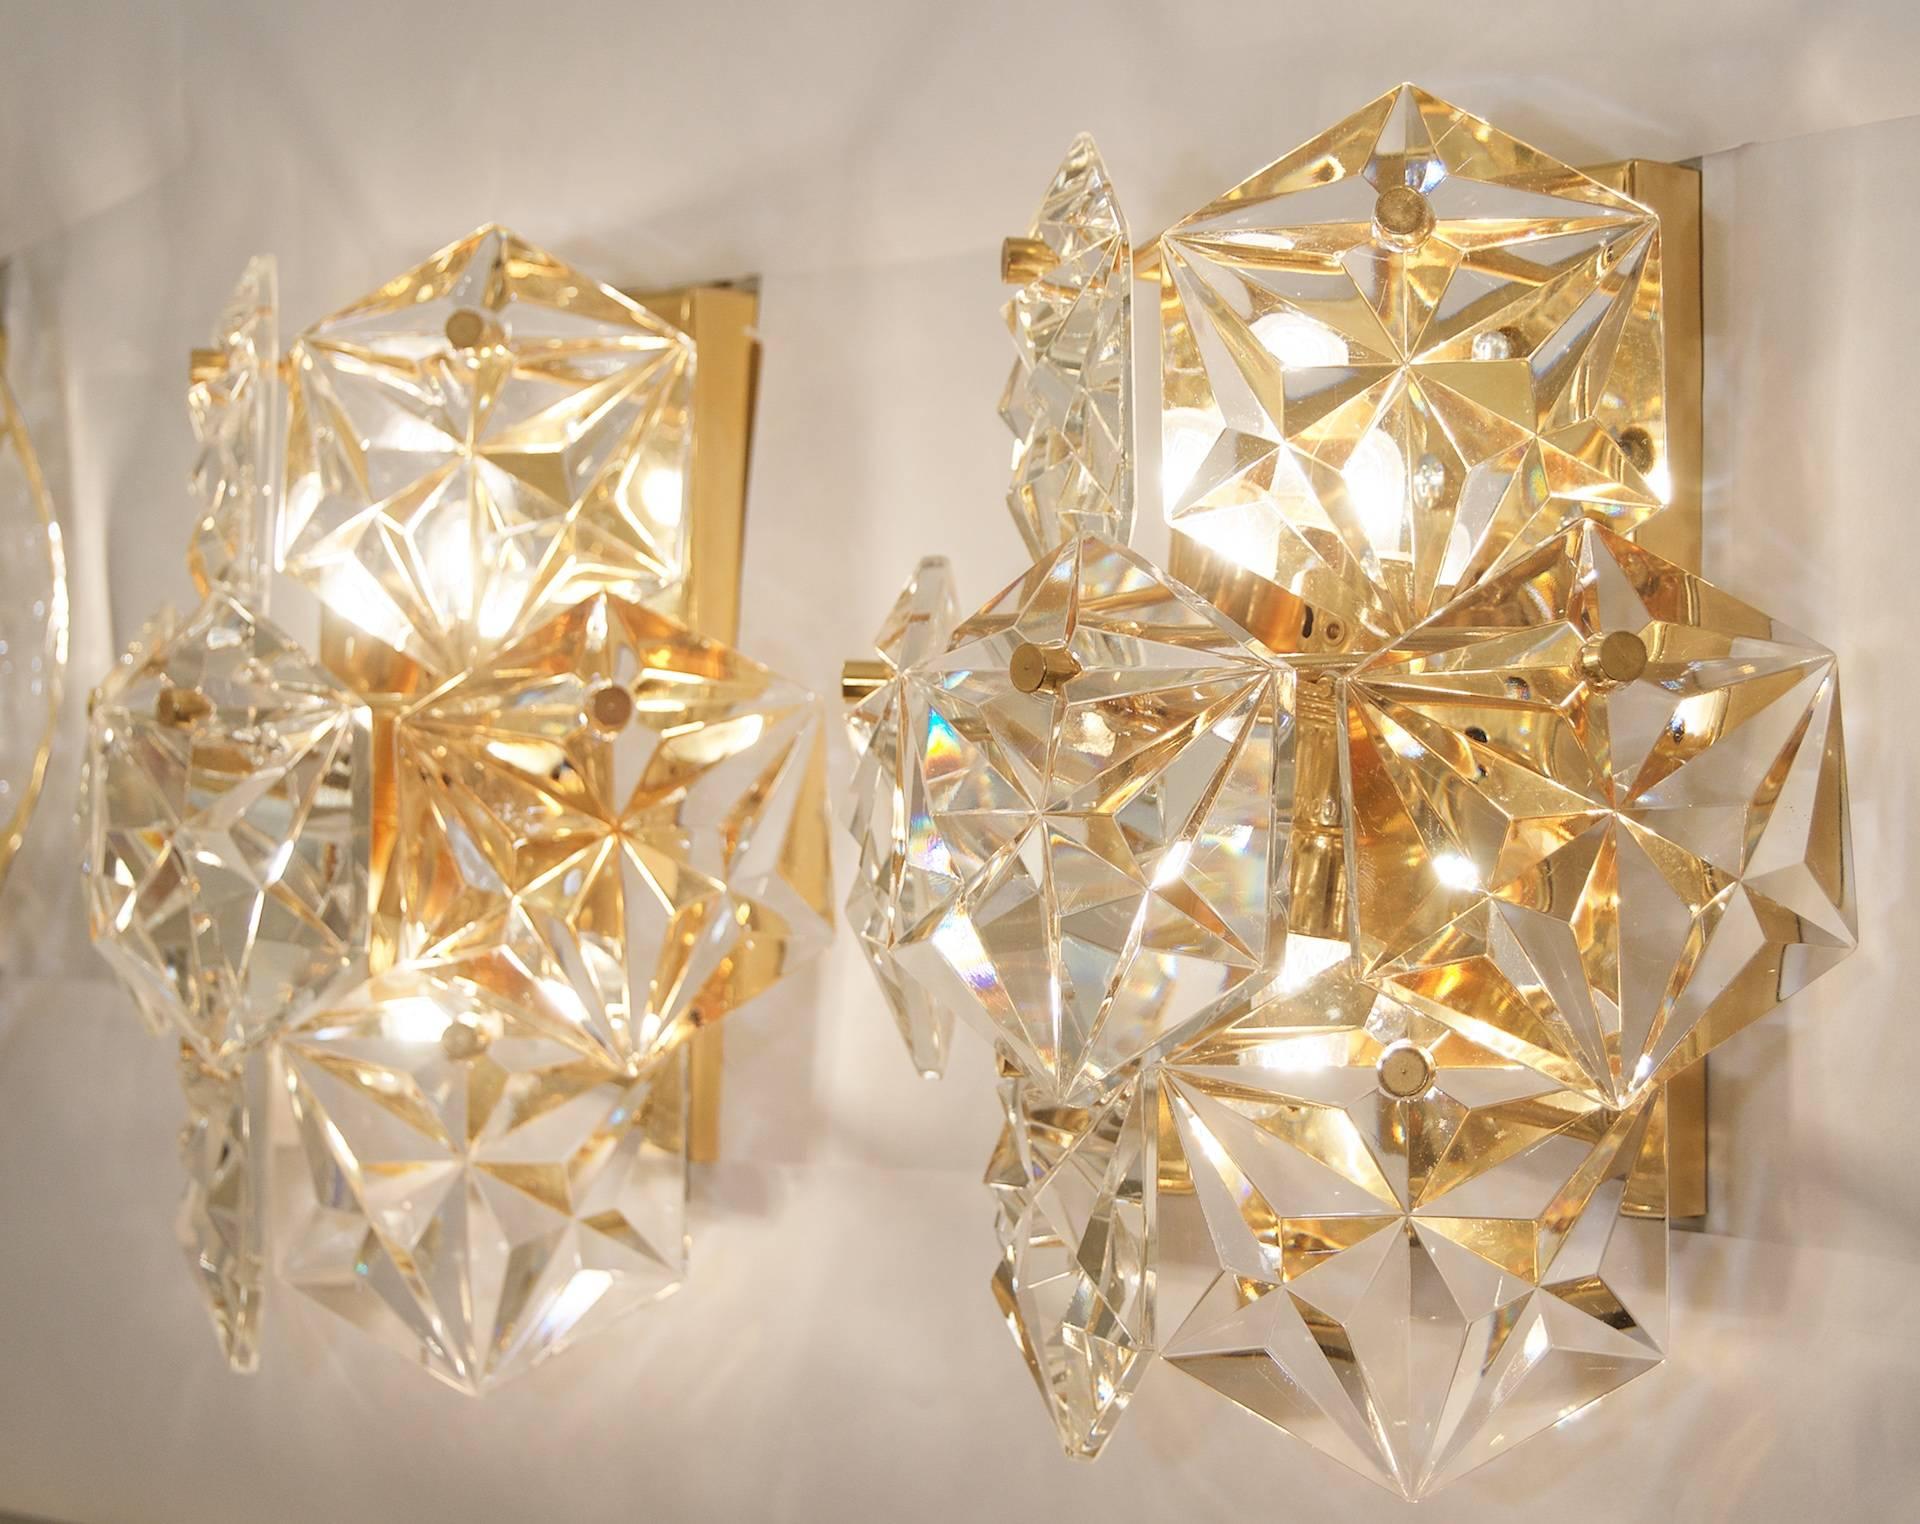 German Kinkeldey Crystal Sconces with Gold Plate Fixture (3 Pairs Available)